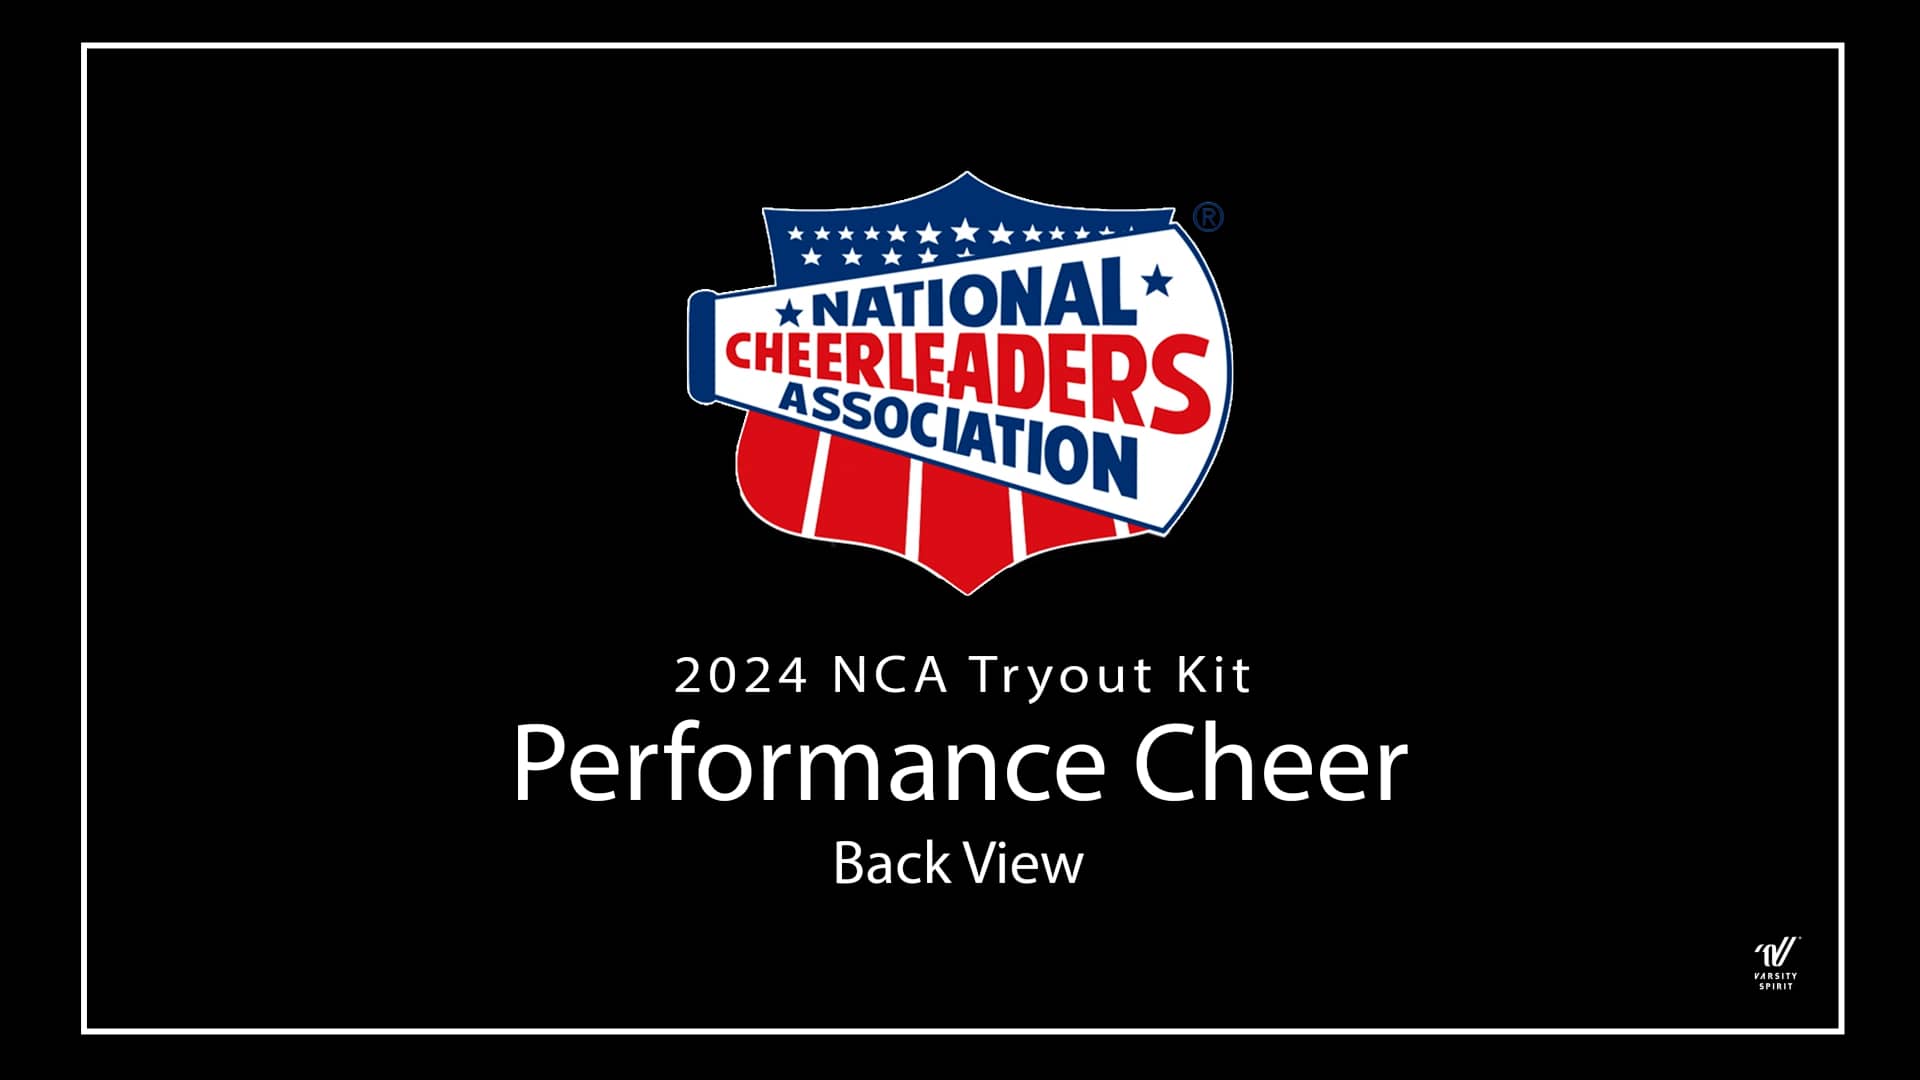 2024 NCA Tryout Kit Performance Cheer Back View on Vimeo